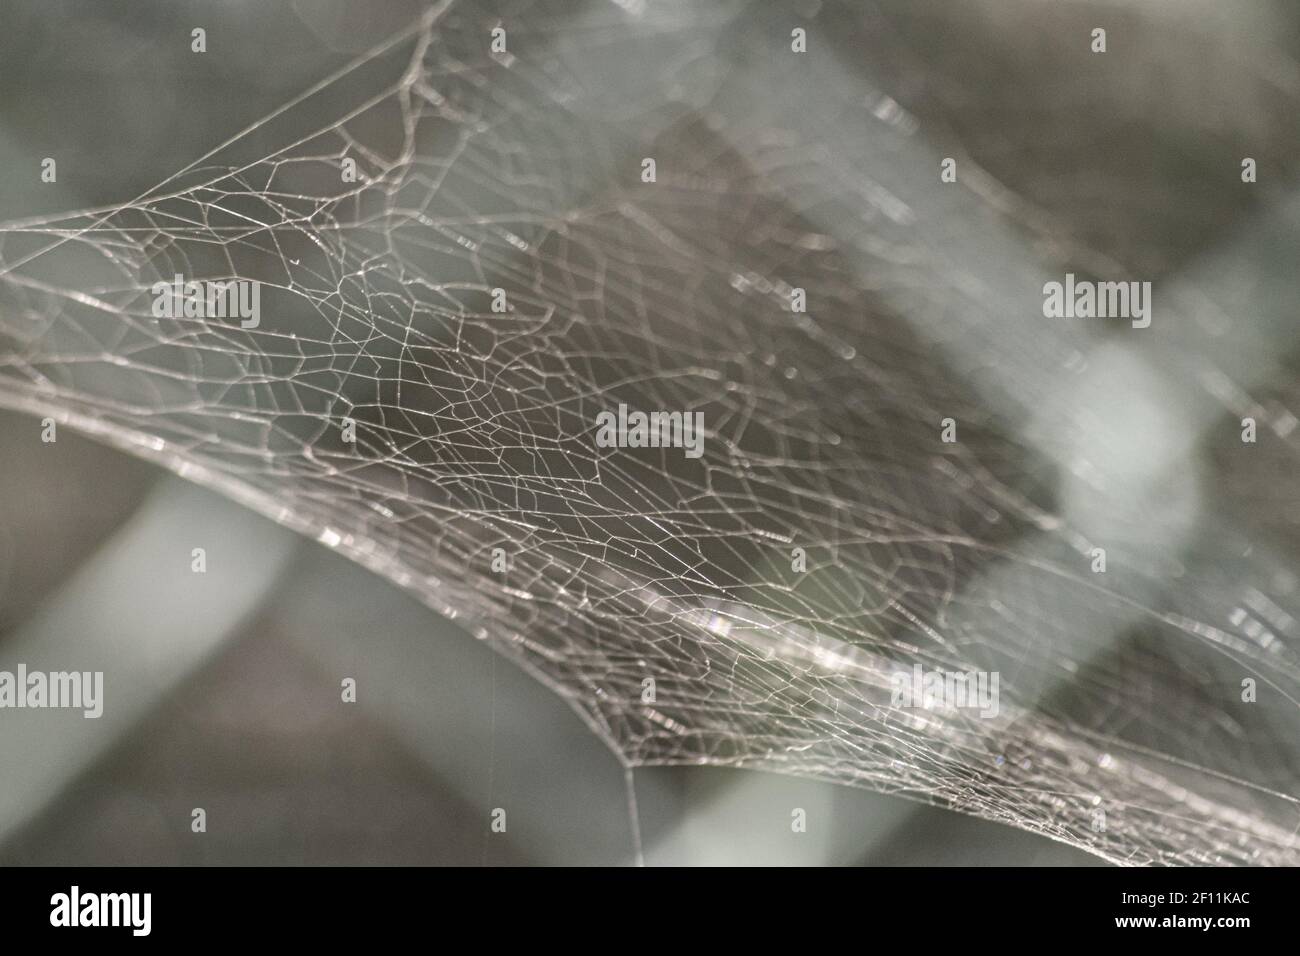 Spider web reflecting natural light found in a tree Stock Photo